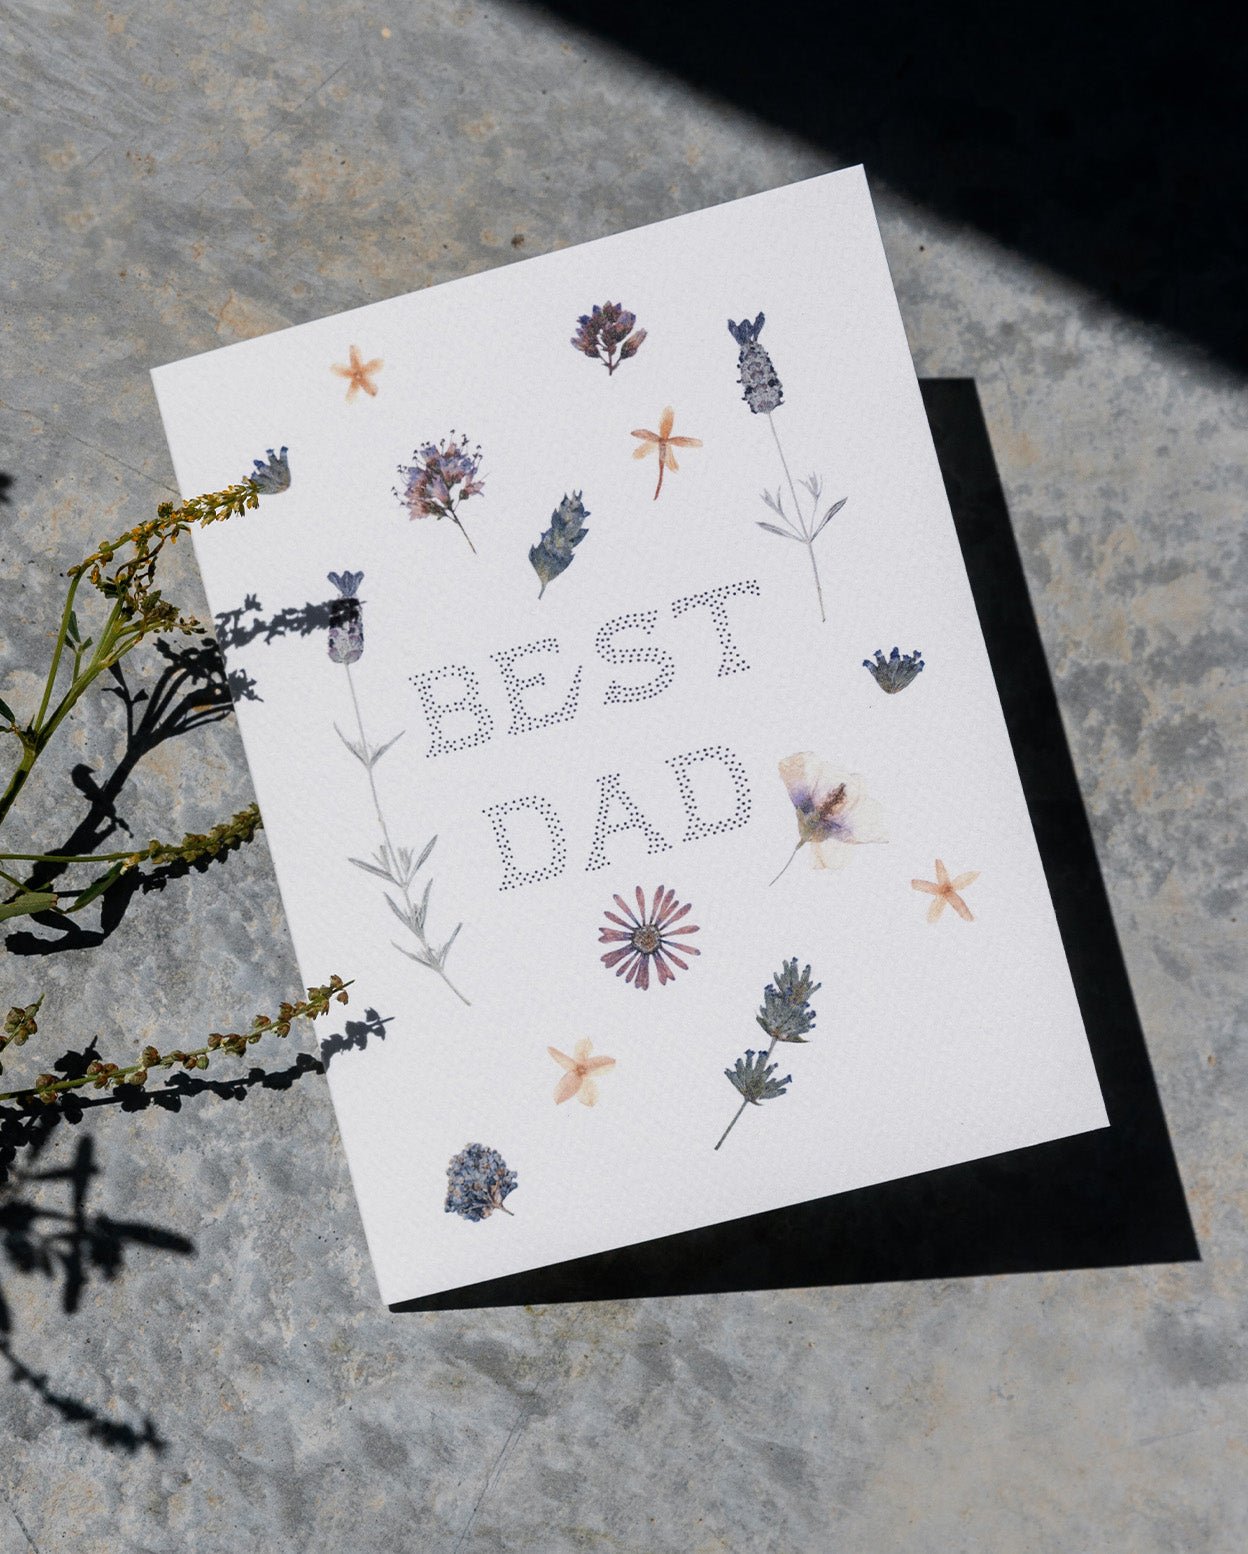 Cream colored card with scattered pressed flowers and the words &quot;Best Dad&quot; in pointillism style font. Shown on grey cement background with flowers.